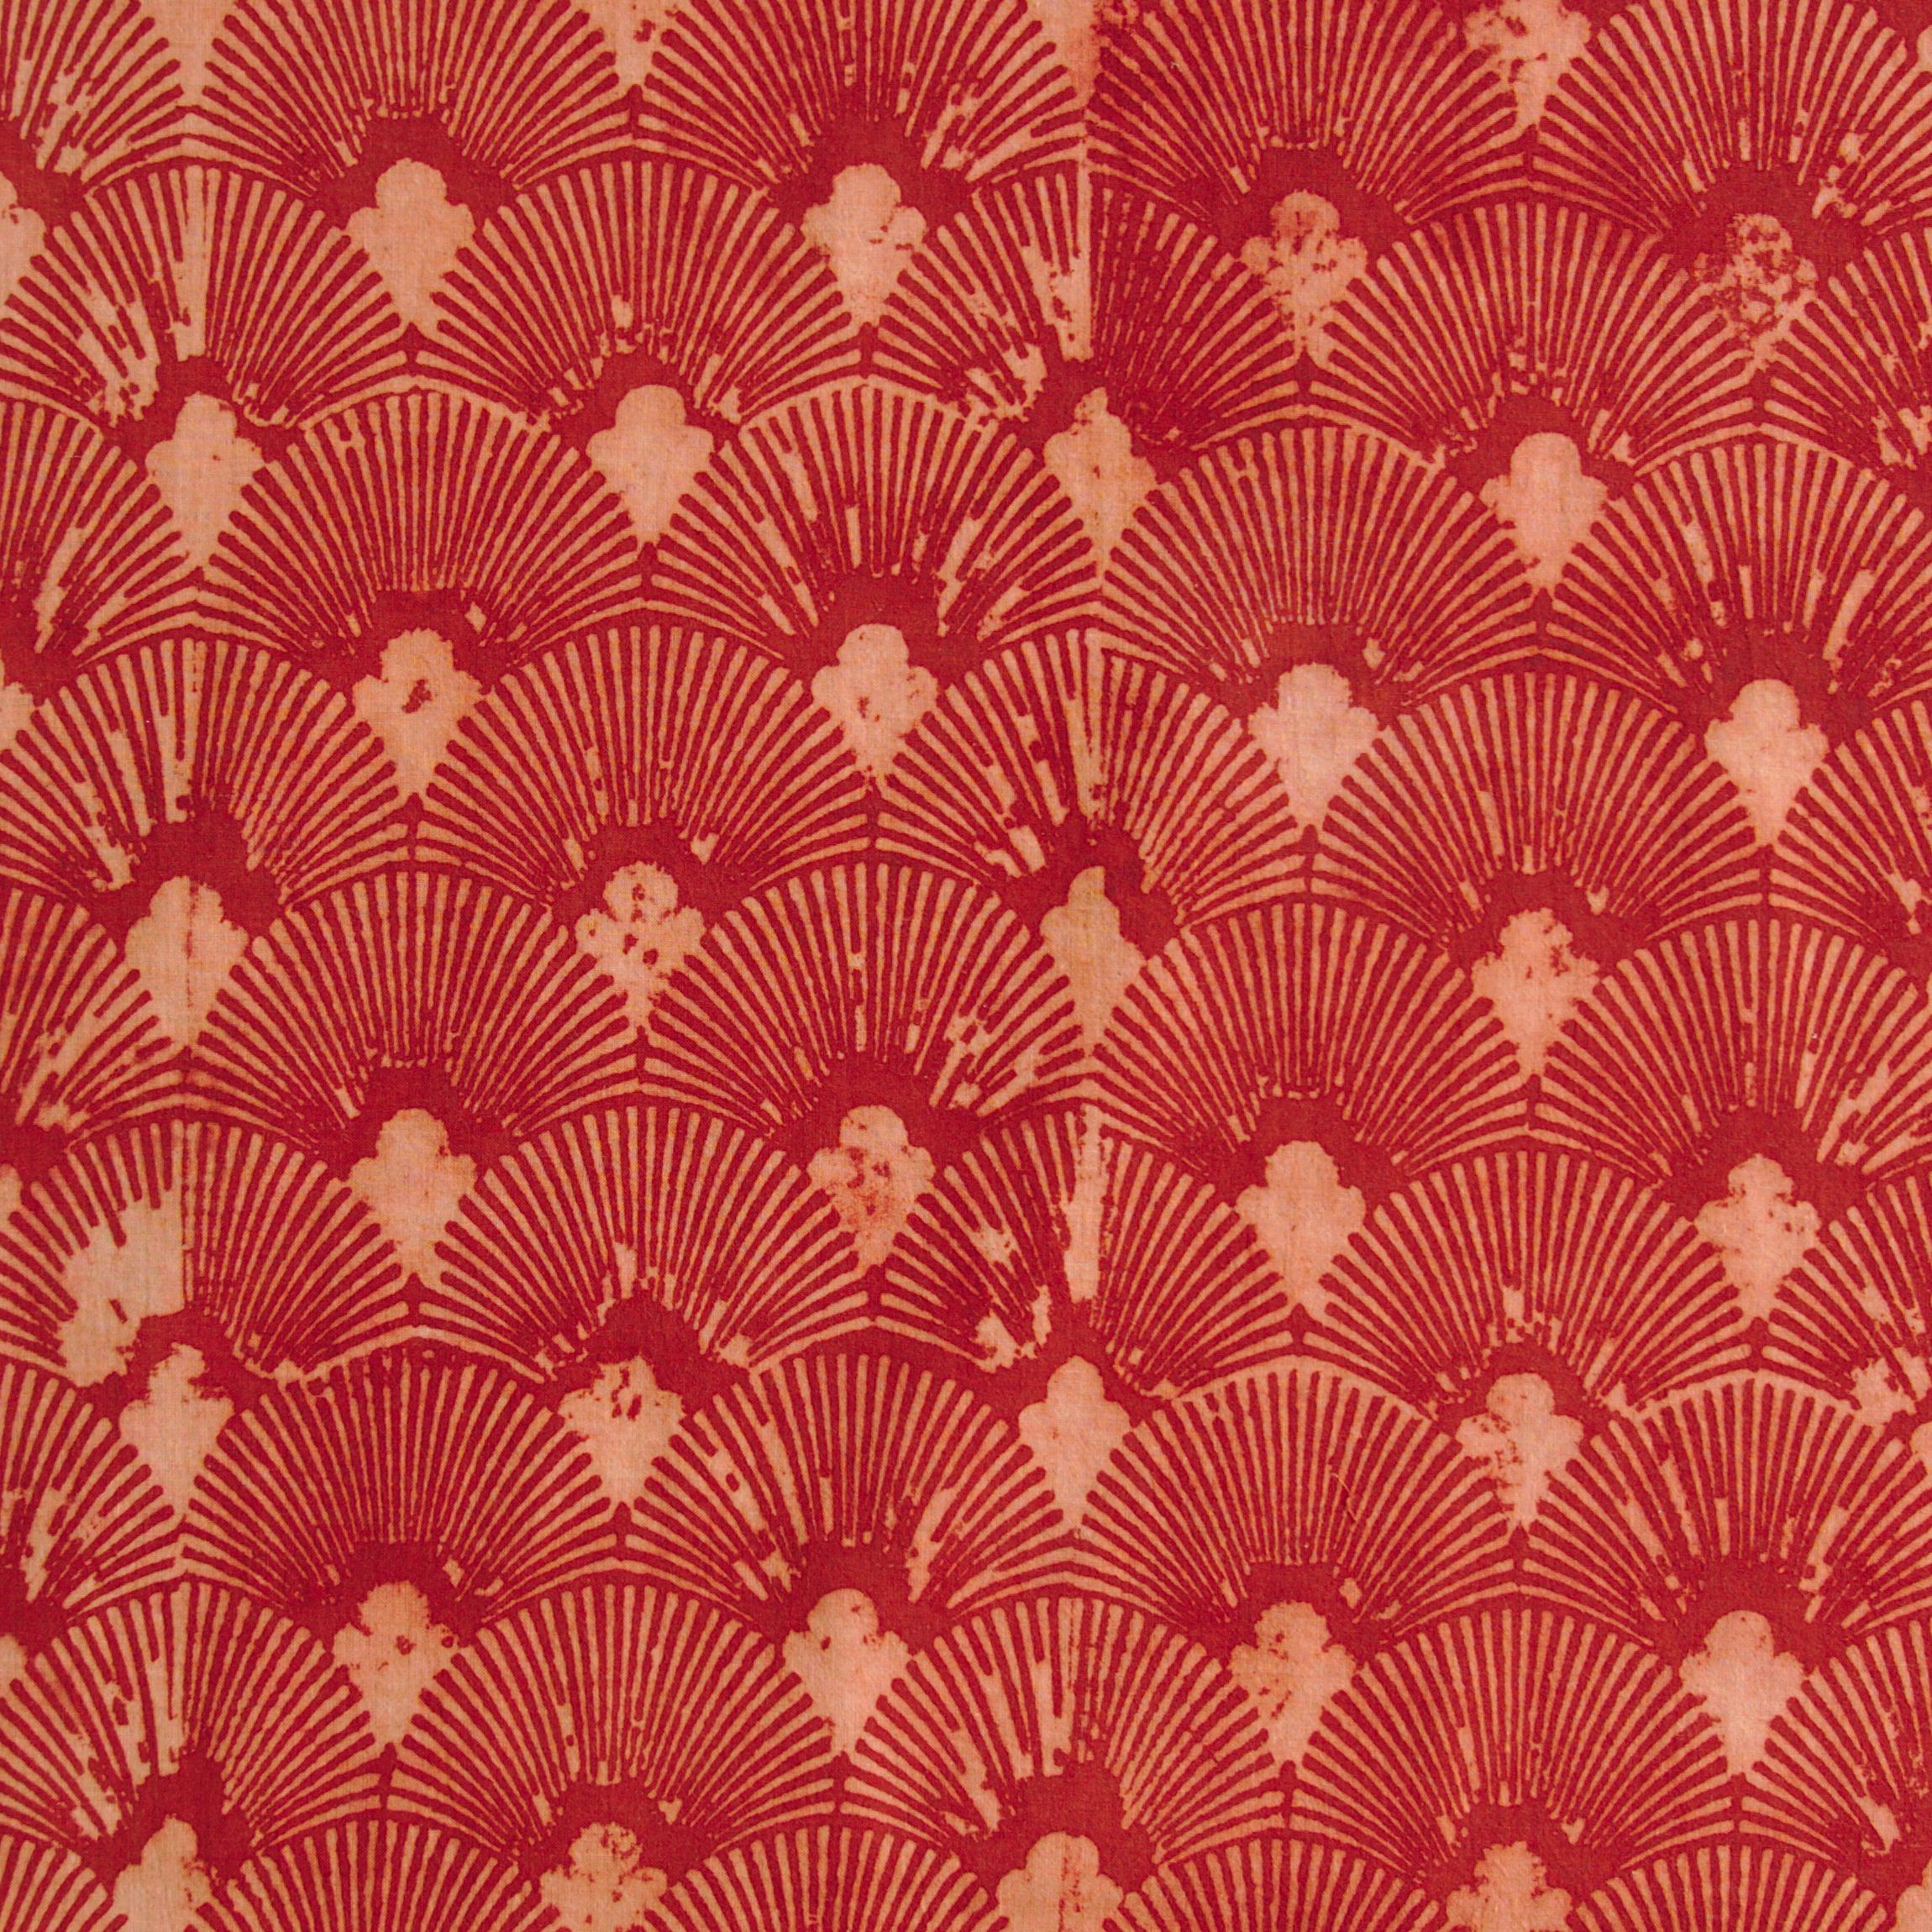 SIK16 - Indian Woodblock-Printed Cotton Fabric - Shell Design - Red Alizarin Dye - Flat